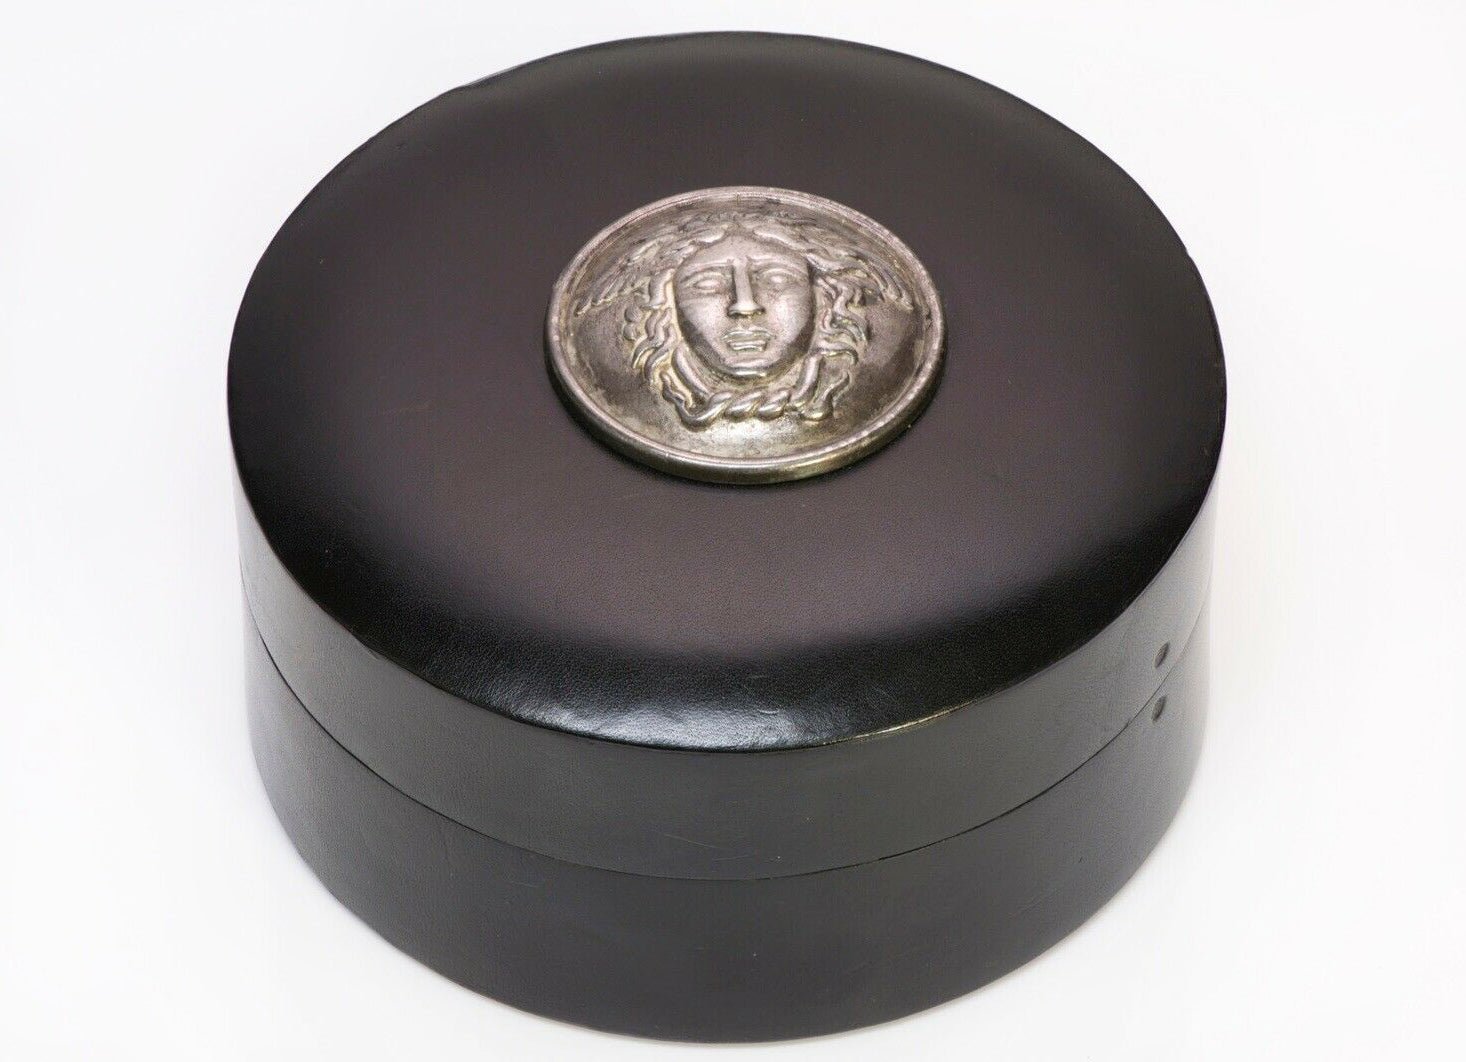 Gianni Versace Black Leather Sterling Silver Medusa Round Jewelry Box Case